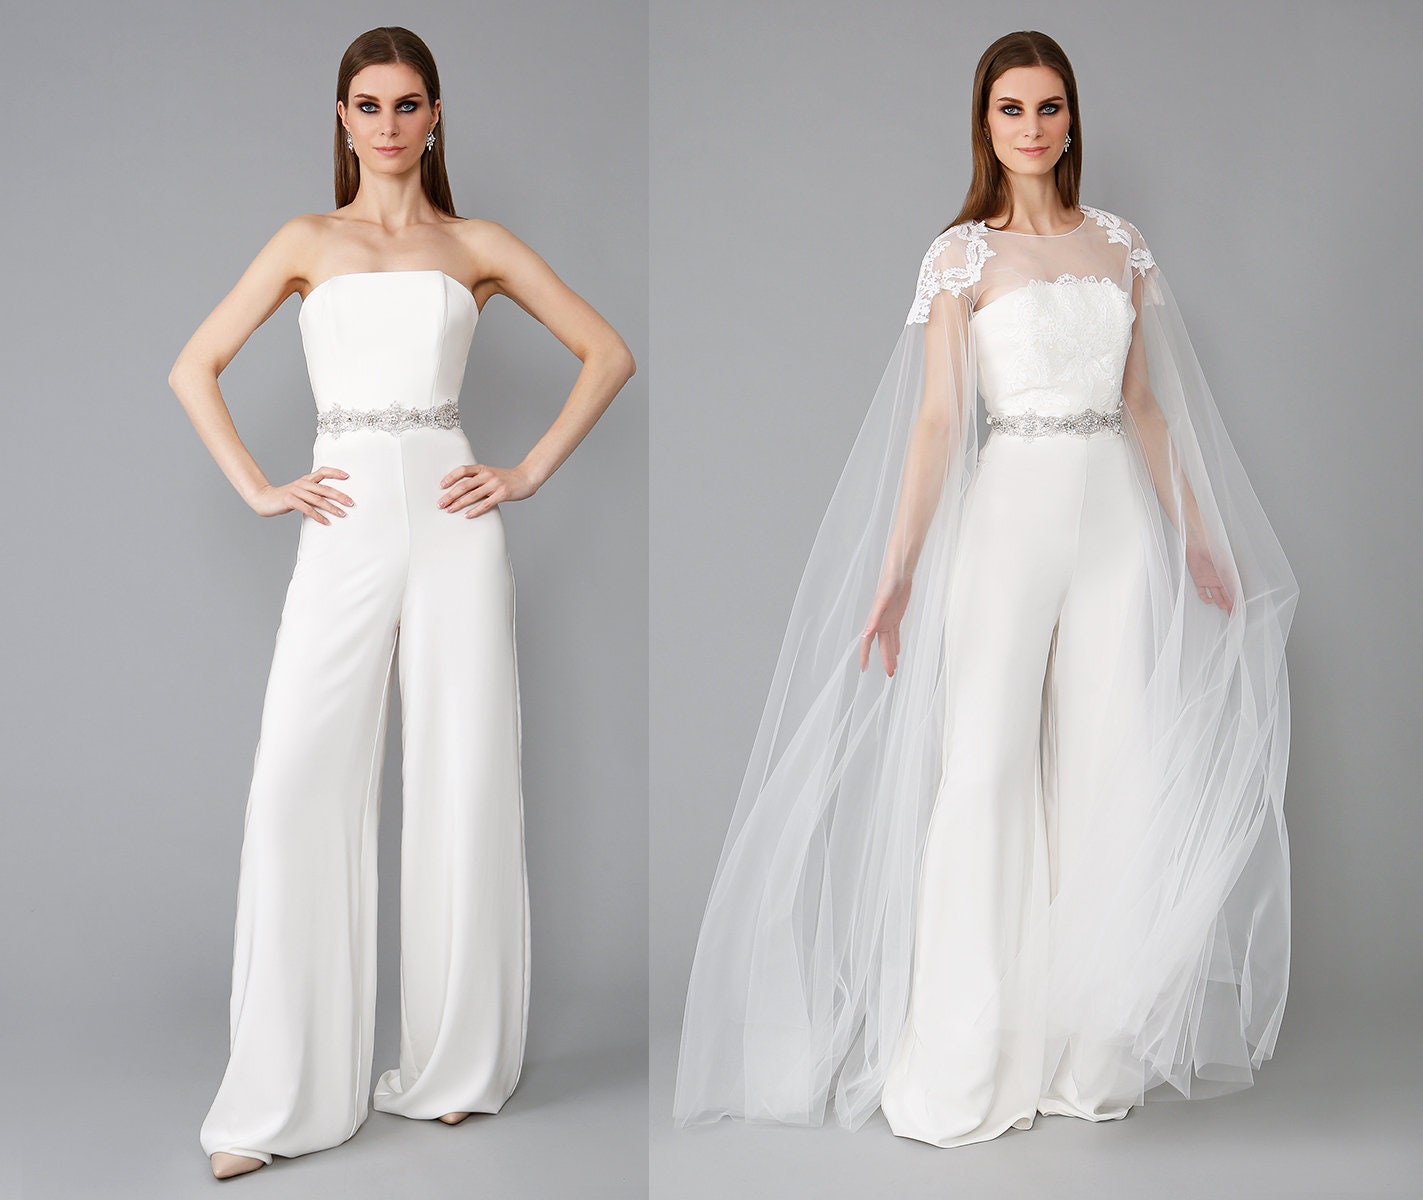 Collection for Wedding Day Pants Suits  TulleLux Bridal Crowns   Accessories